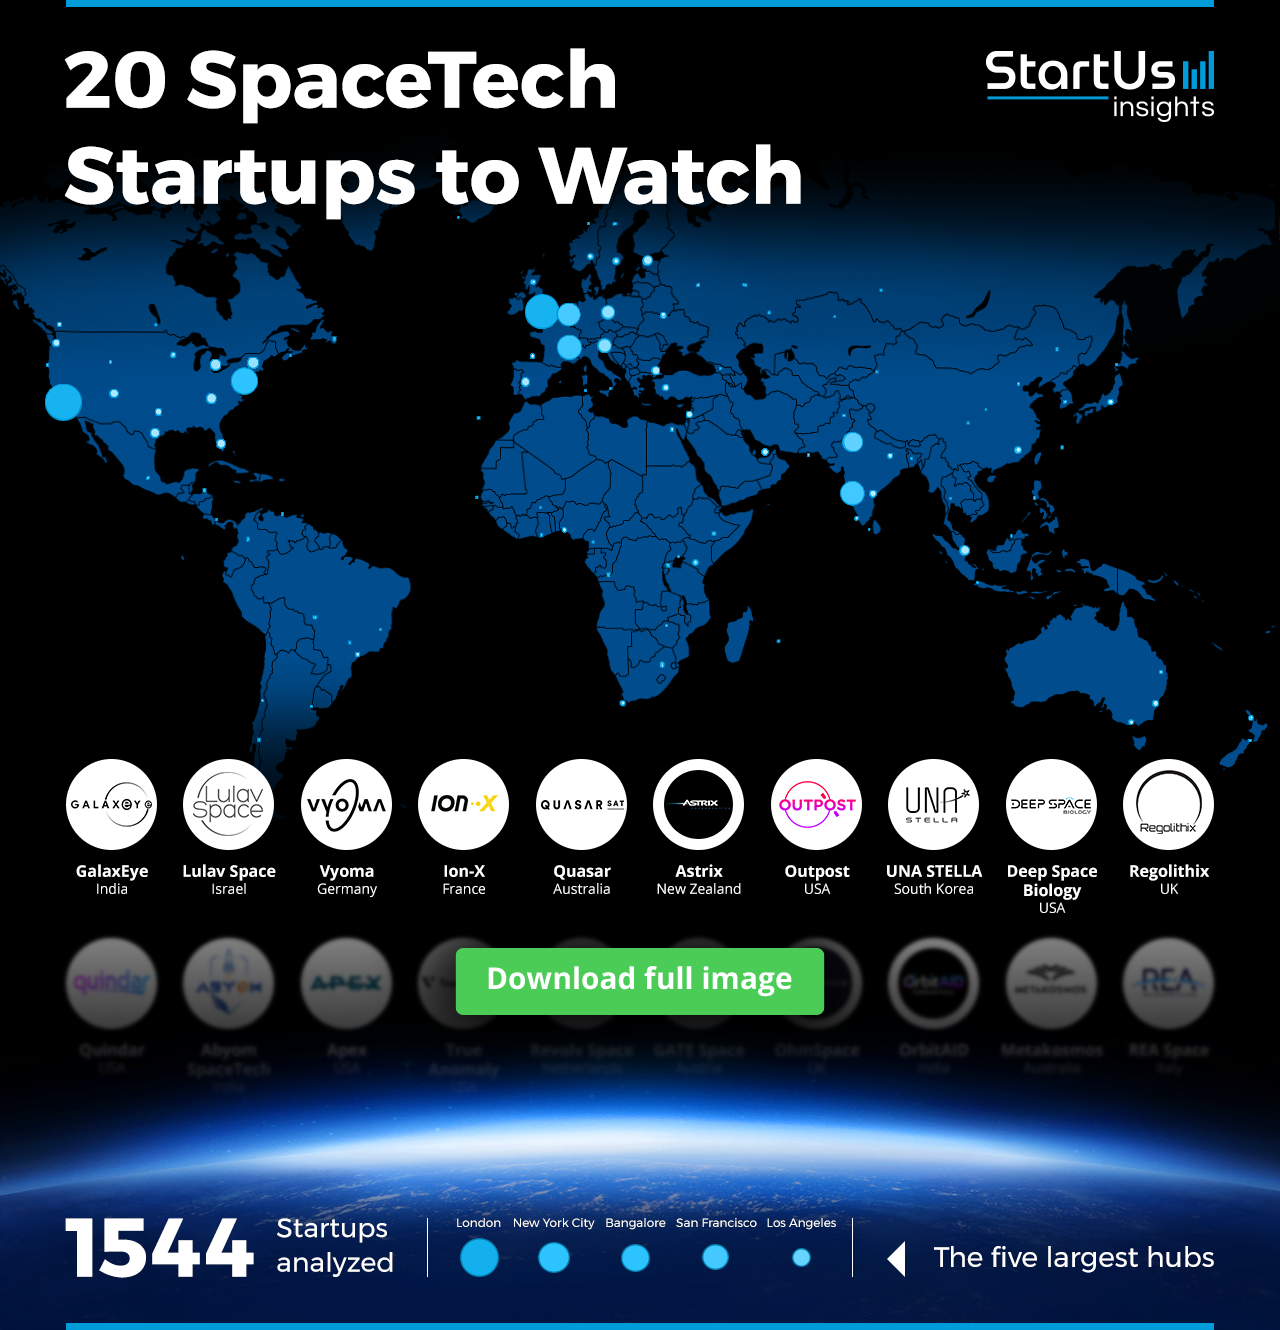 SpaceTech-Startups-to-Watch-Heat-Map-Blurred-StartUs-Insights-noresize